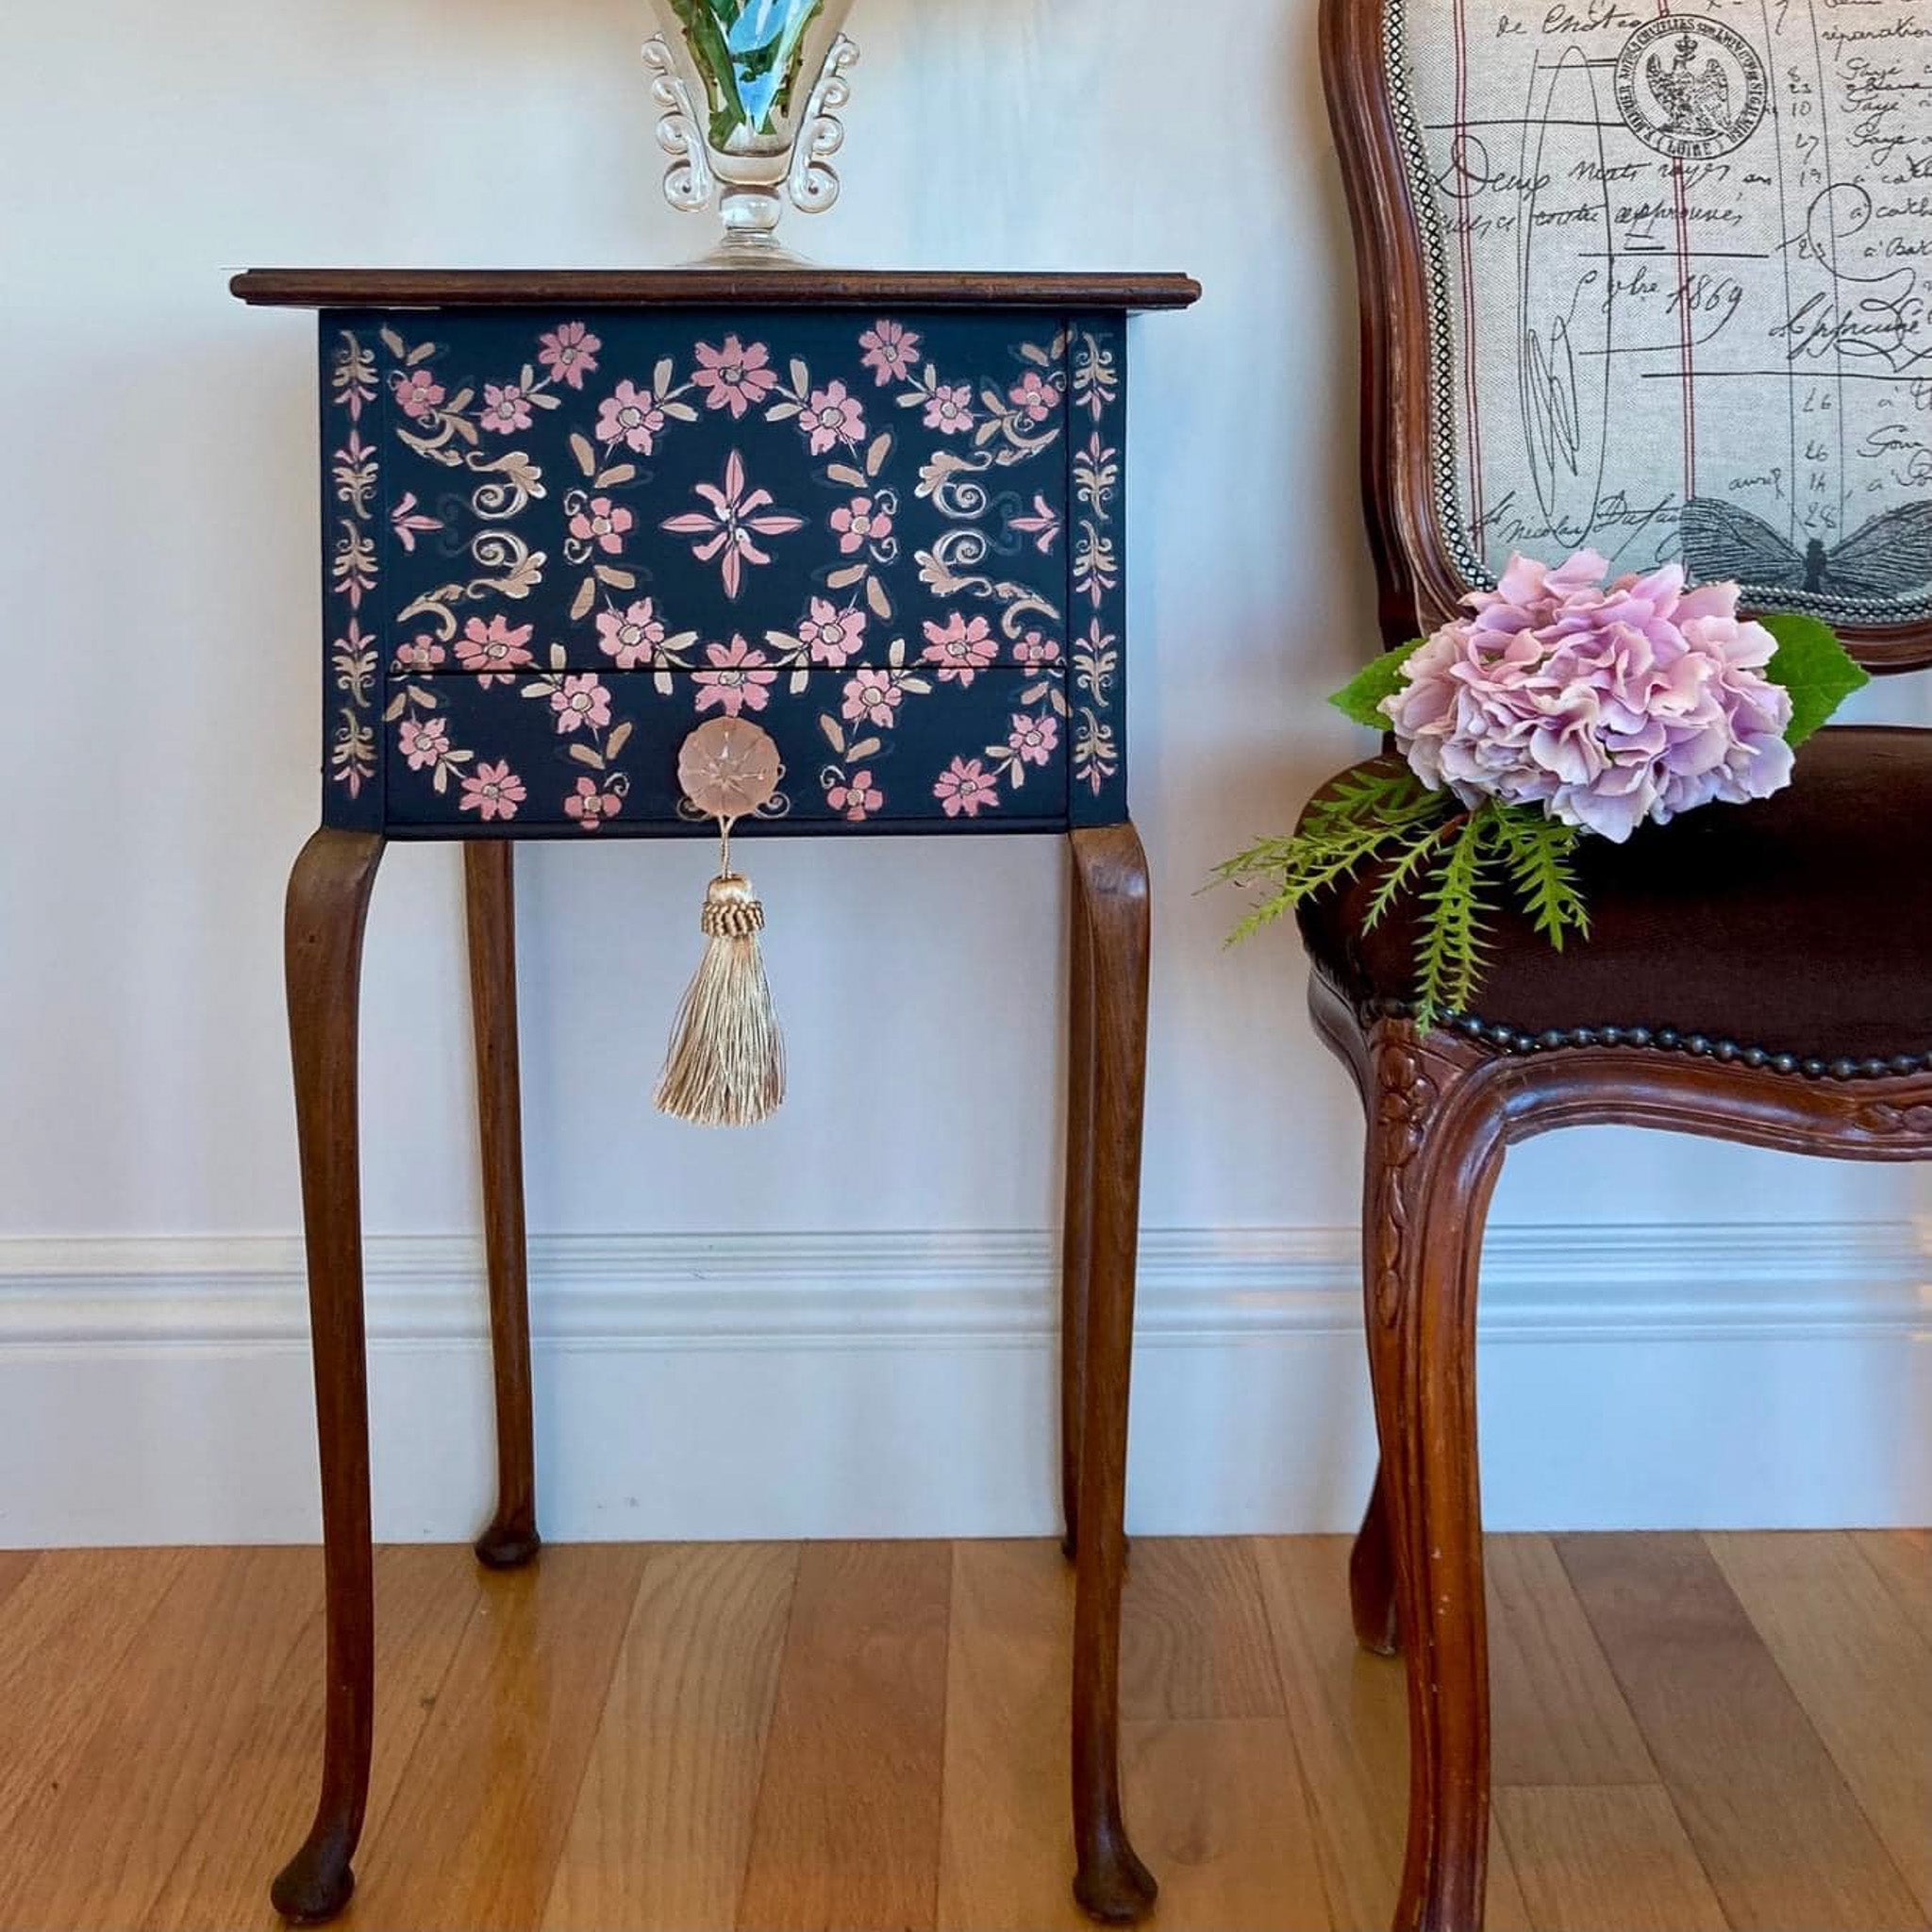 A small vintage side table is painted dark blue with natural wood accents and features ReDesign with Prima's Annie Sloan Flower Garland rub-on transfer on its drawer.